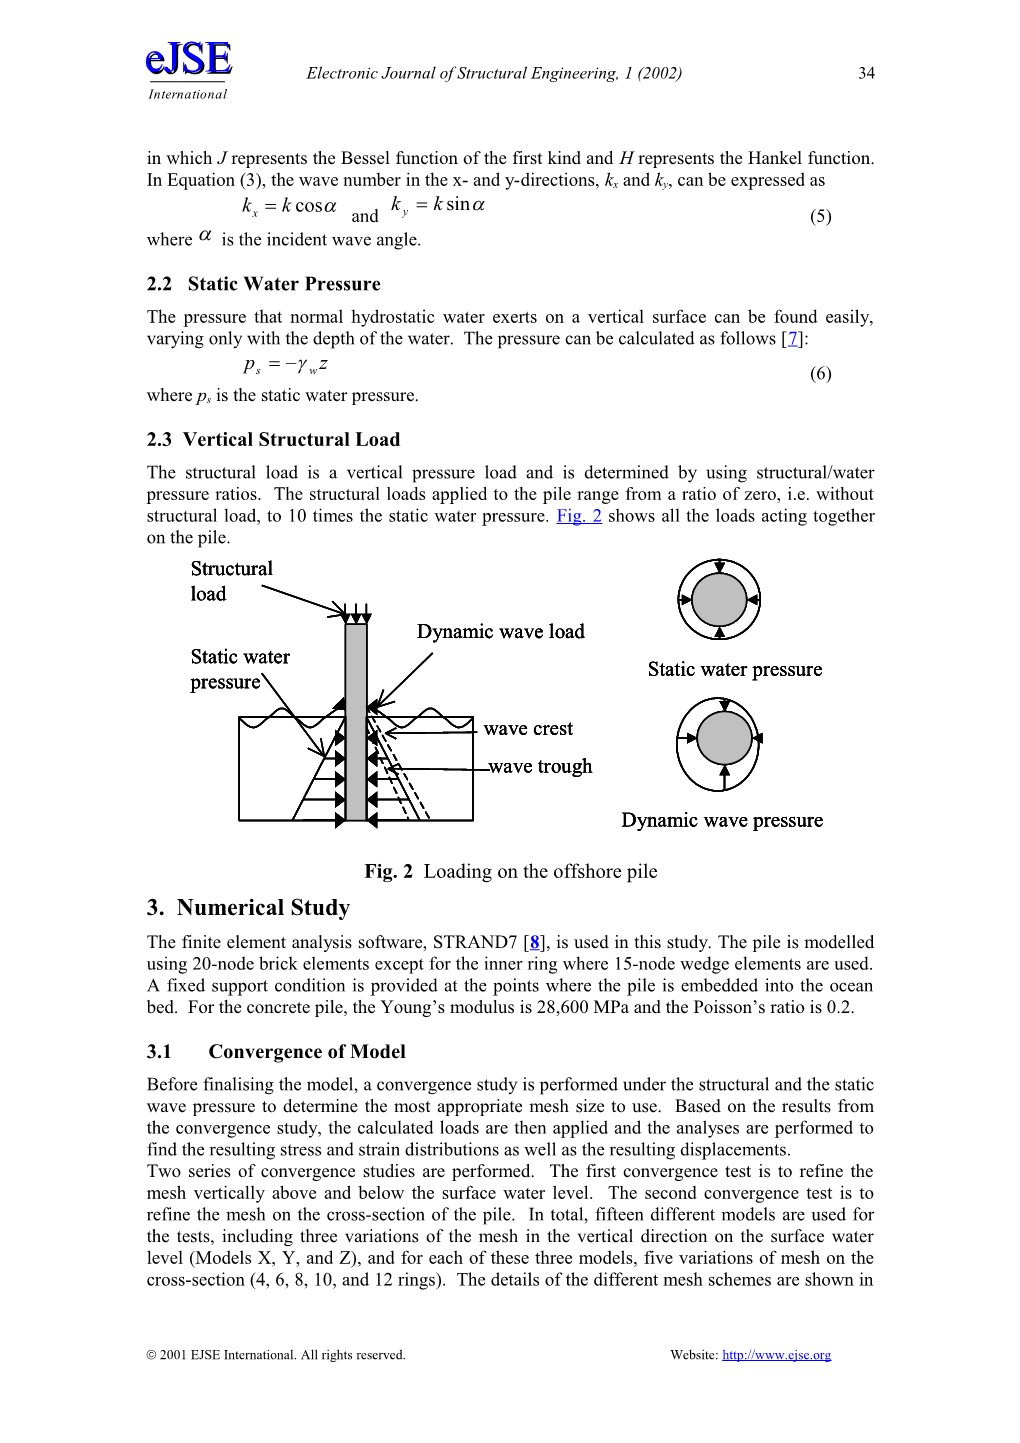 A Parametric Study of an Offshore Concrete Pile Under Combined Loading Conditions Using